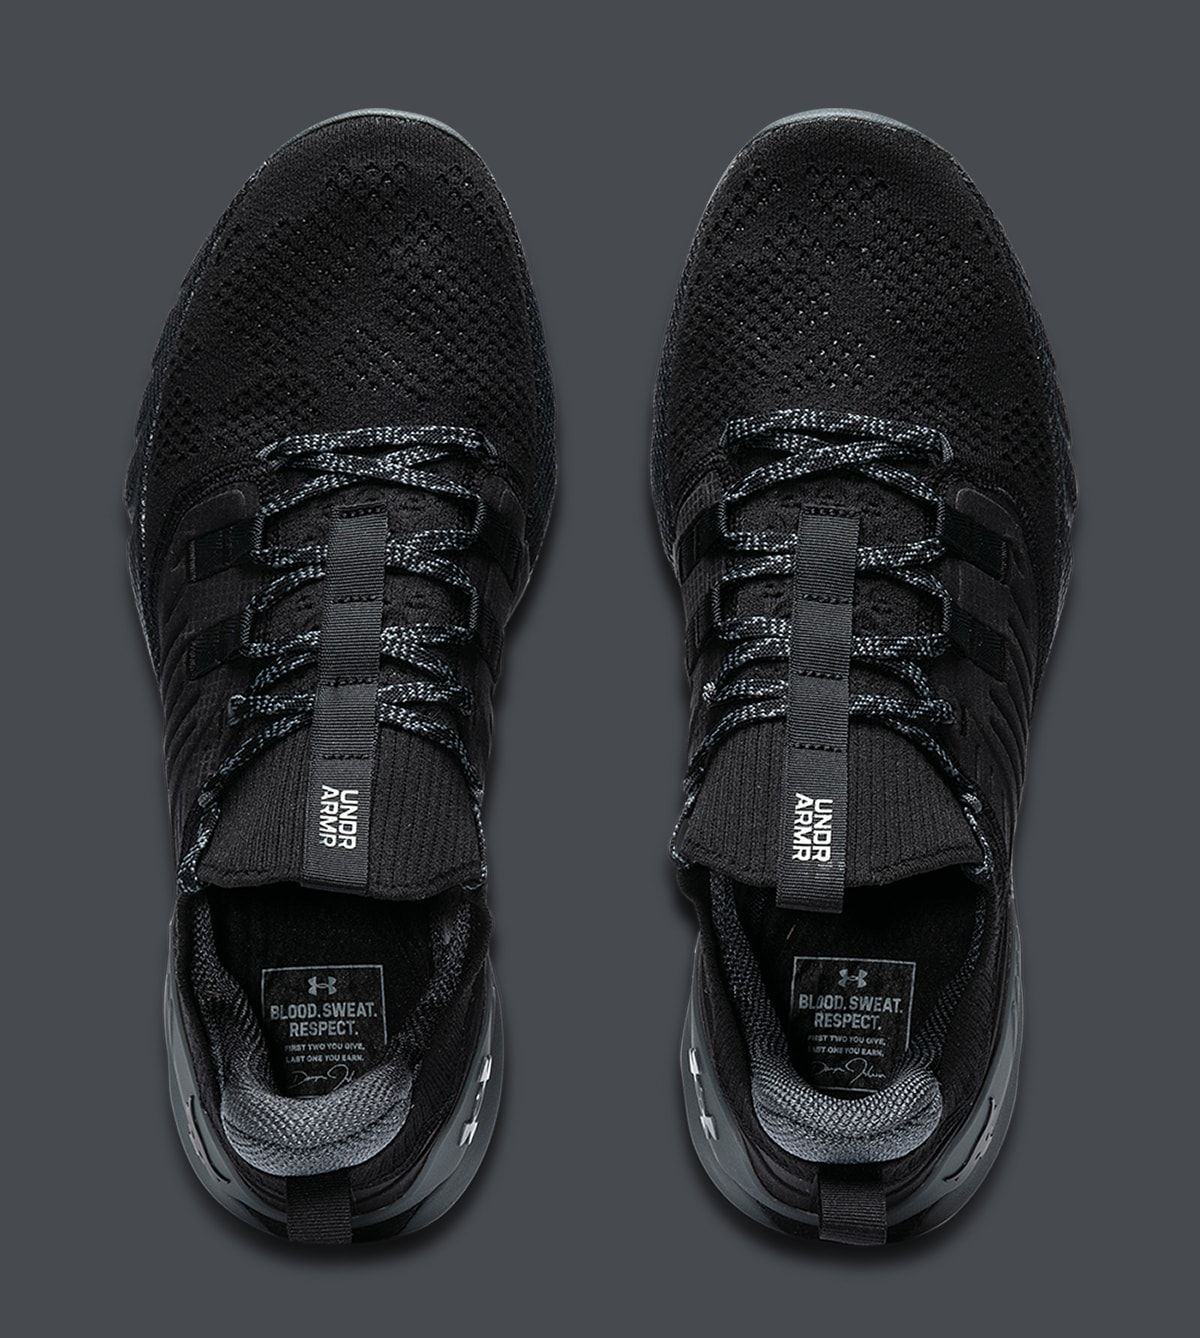 The Under Armour Project Rock 3 Debuts in Black/Grey on September 3rd ...